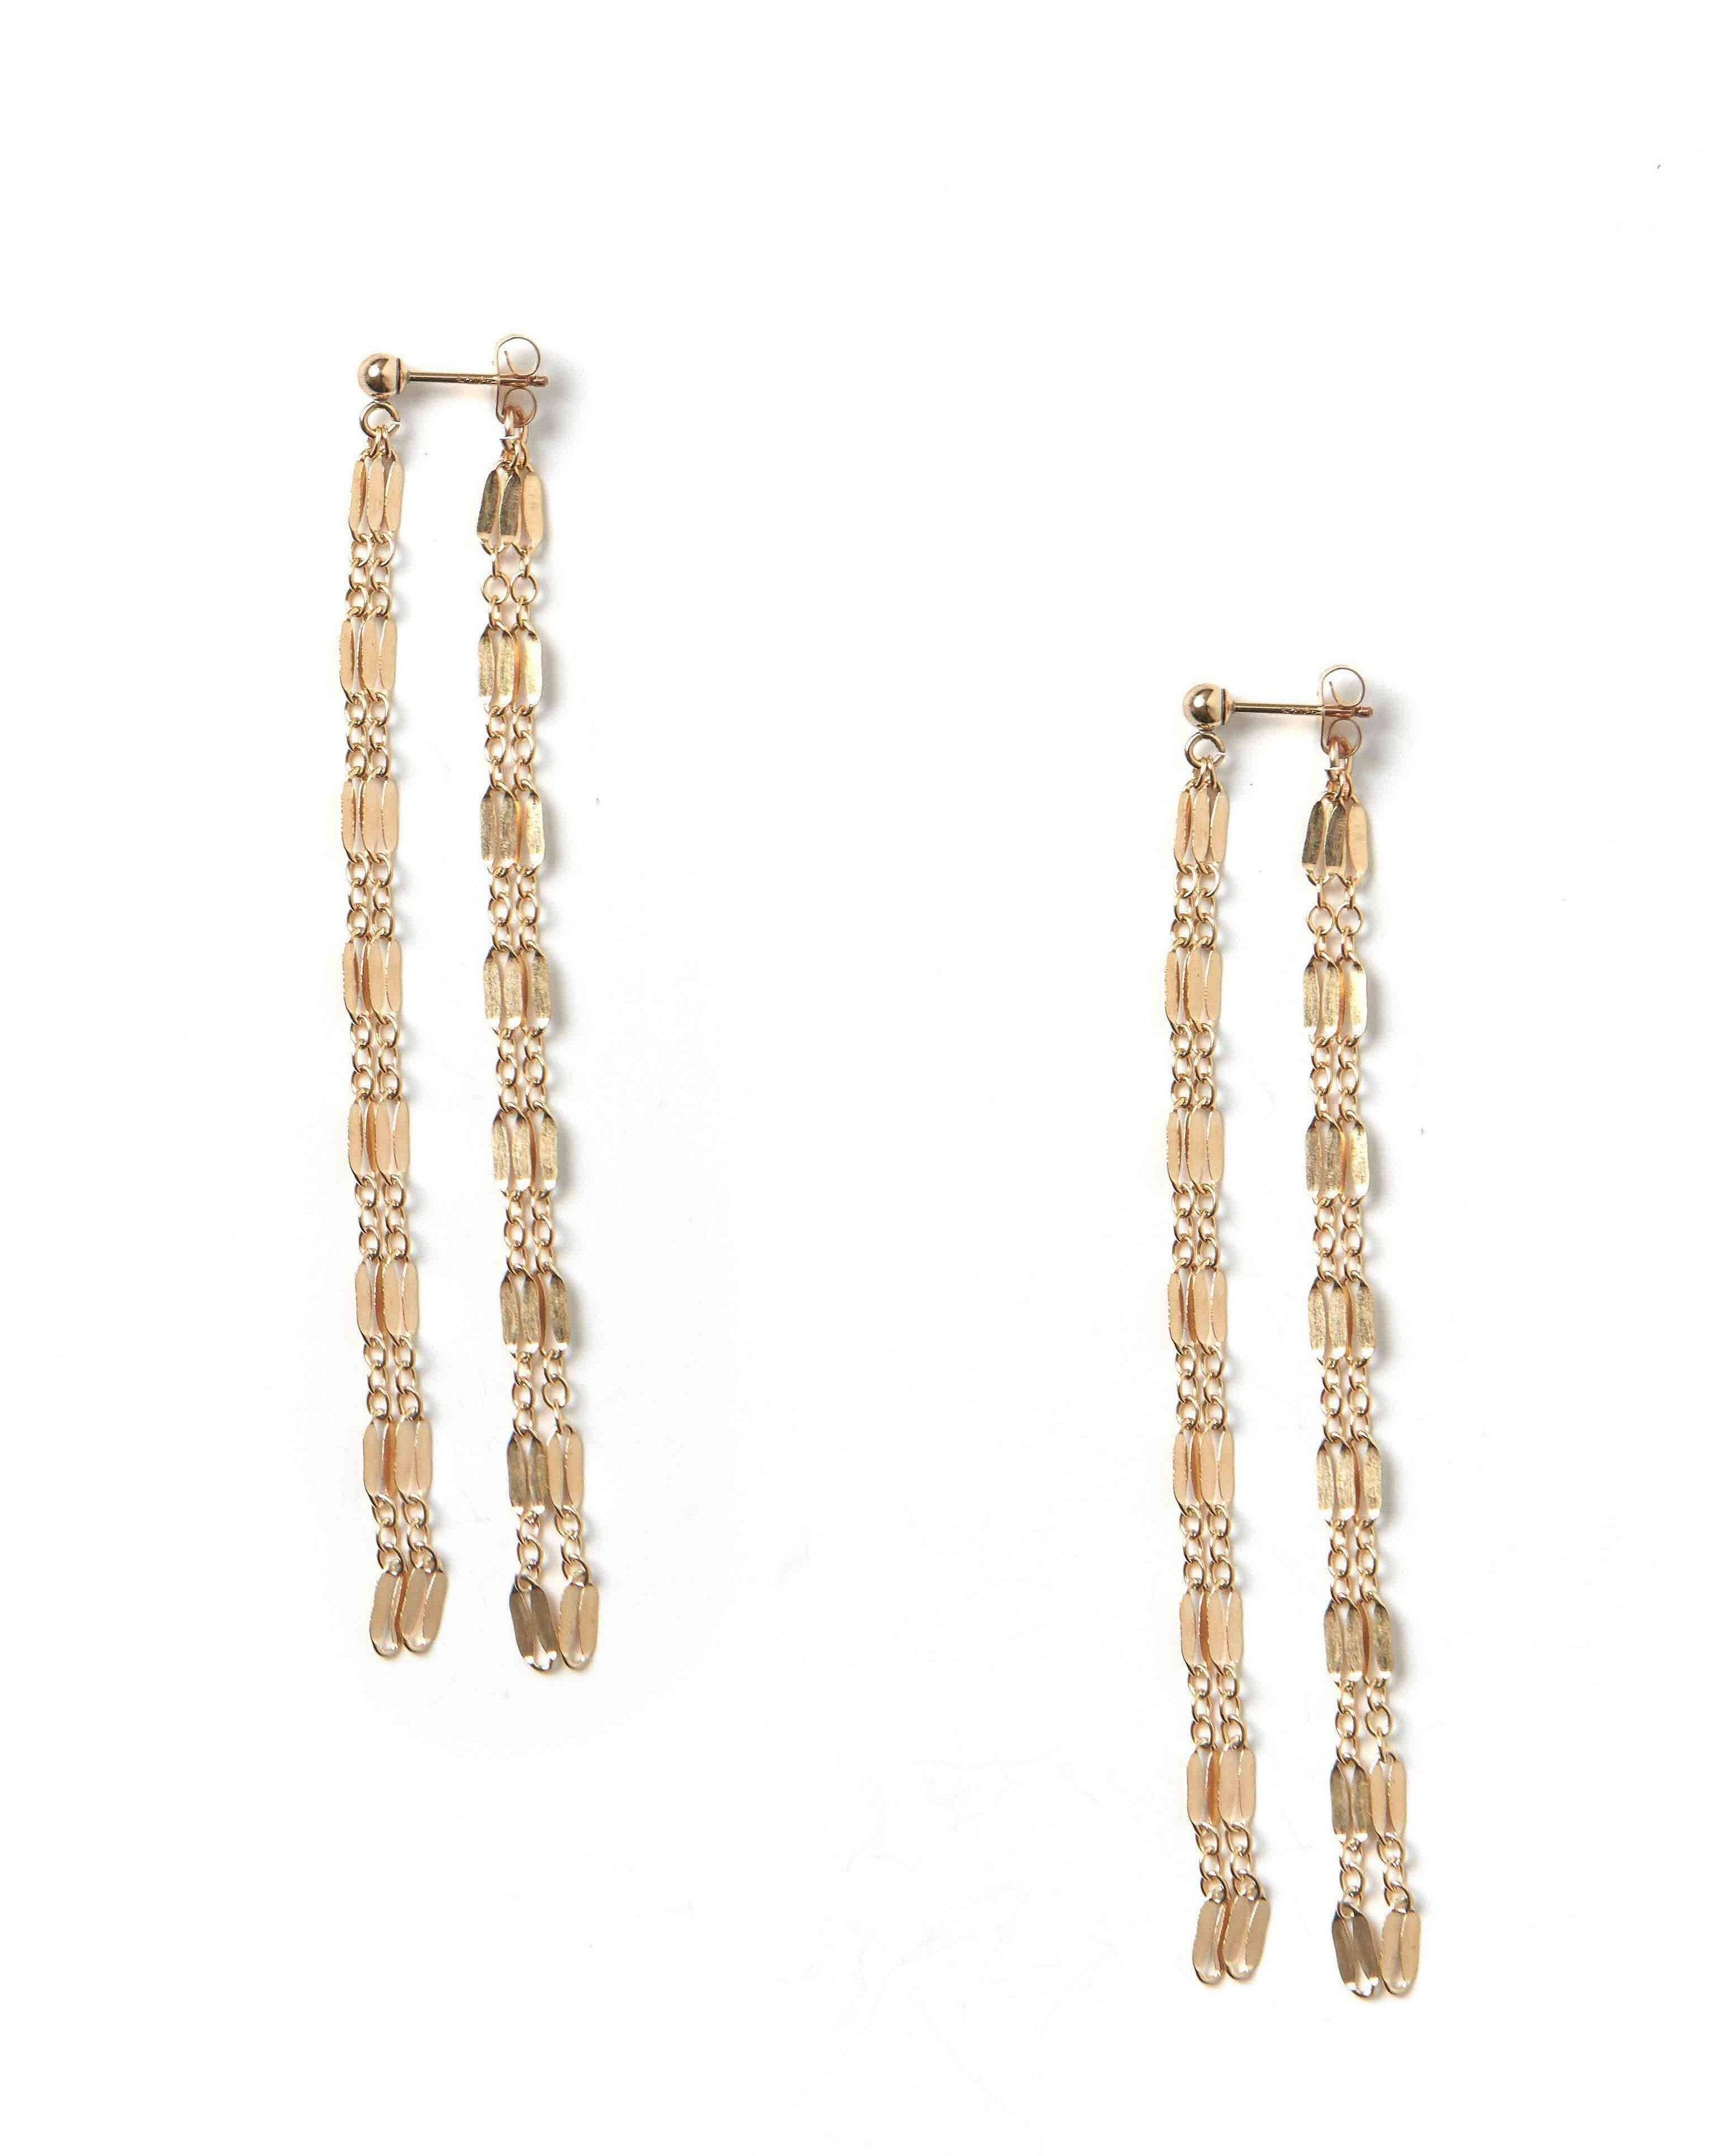 Avenas Earrings by KOZAKH. Double chain style drop earrings in 14K Gold Filled with earring drop length of 3 inches.